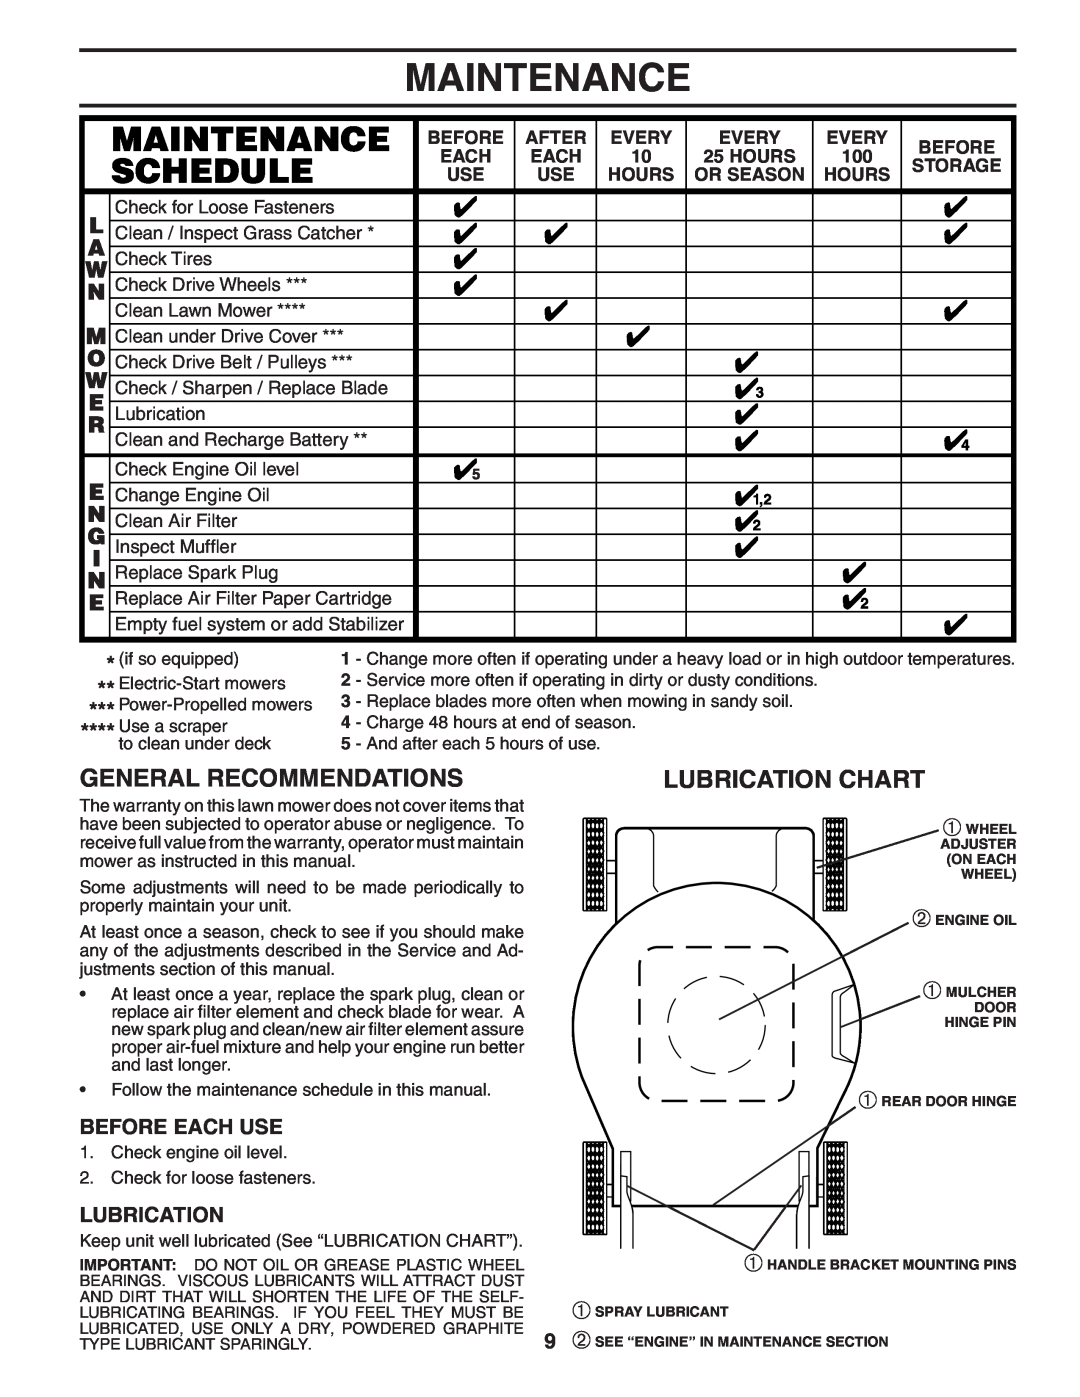 Husqvarna 6021P Maintenance, General Recommendations, Lubrication Chart, Before Each Use, After, Every, Storage, Hours 